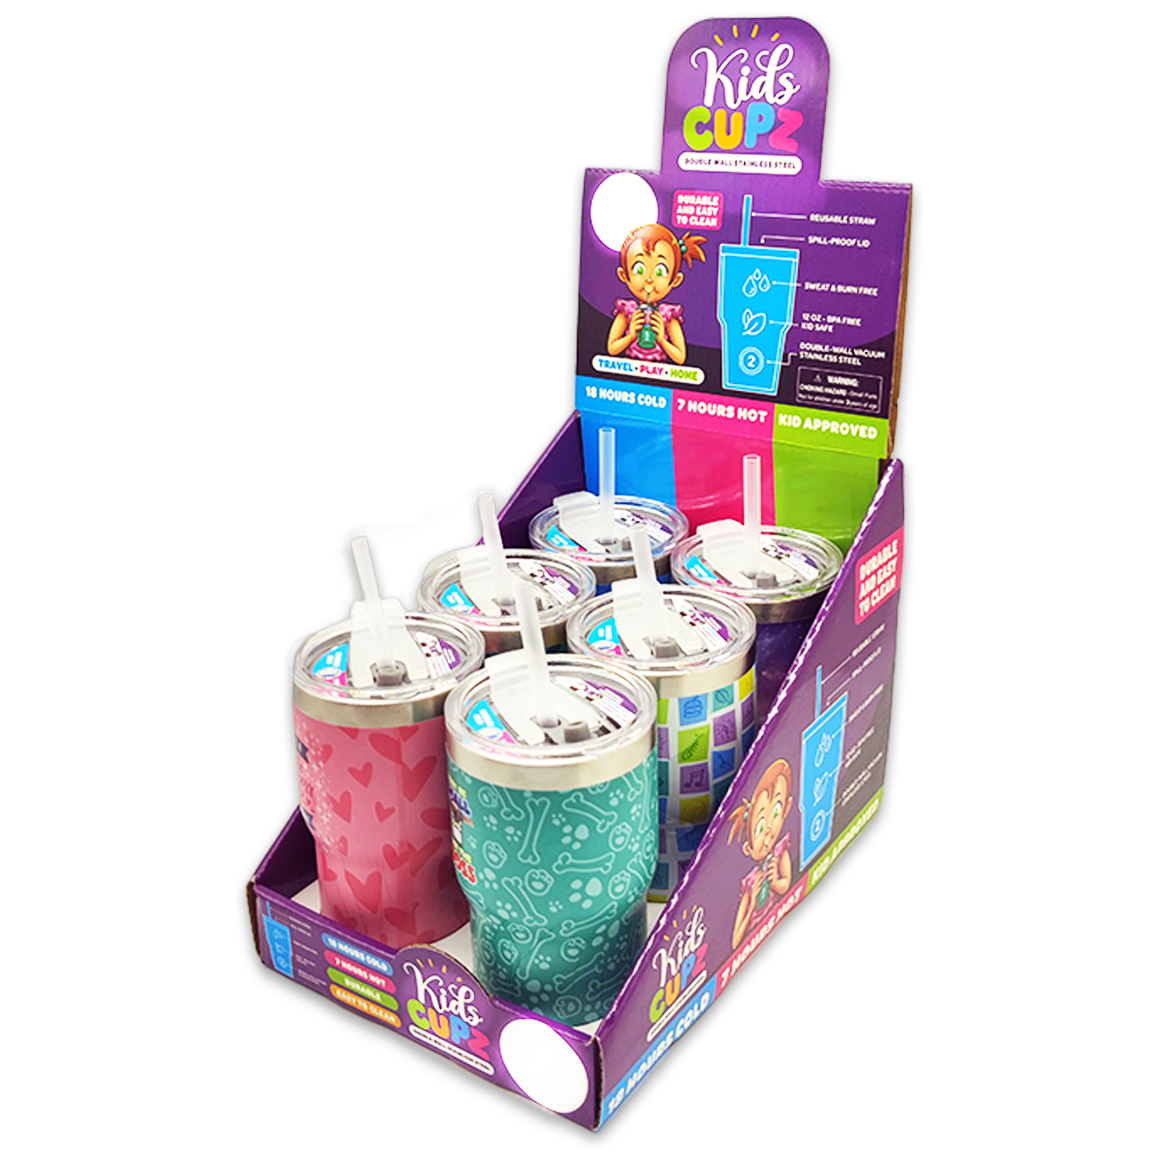 WHOLESALE 12OZ INSULATED KIDS CUPZ 6 PIECES PER DISPLAY 24716